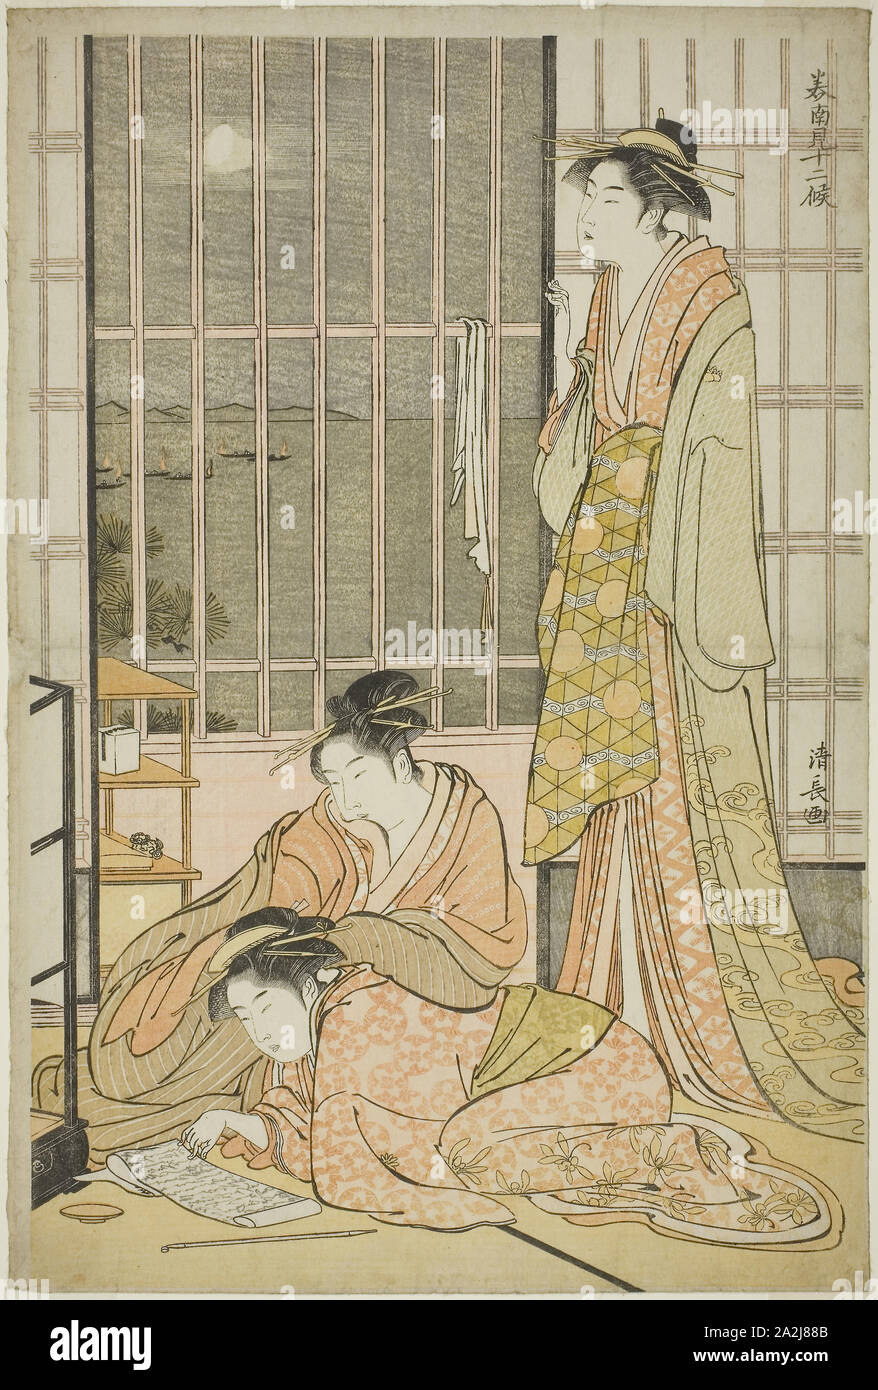 The Ninth Month, from the series Twelve Months in the South (Minami juni ko), c. 1784, Torii Kiyonaga, Japanese, 1752-1815, Japan, Color woodblock print, oban, 39.2 x 26.4 cm Stock Photo